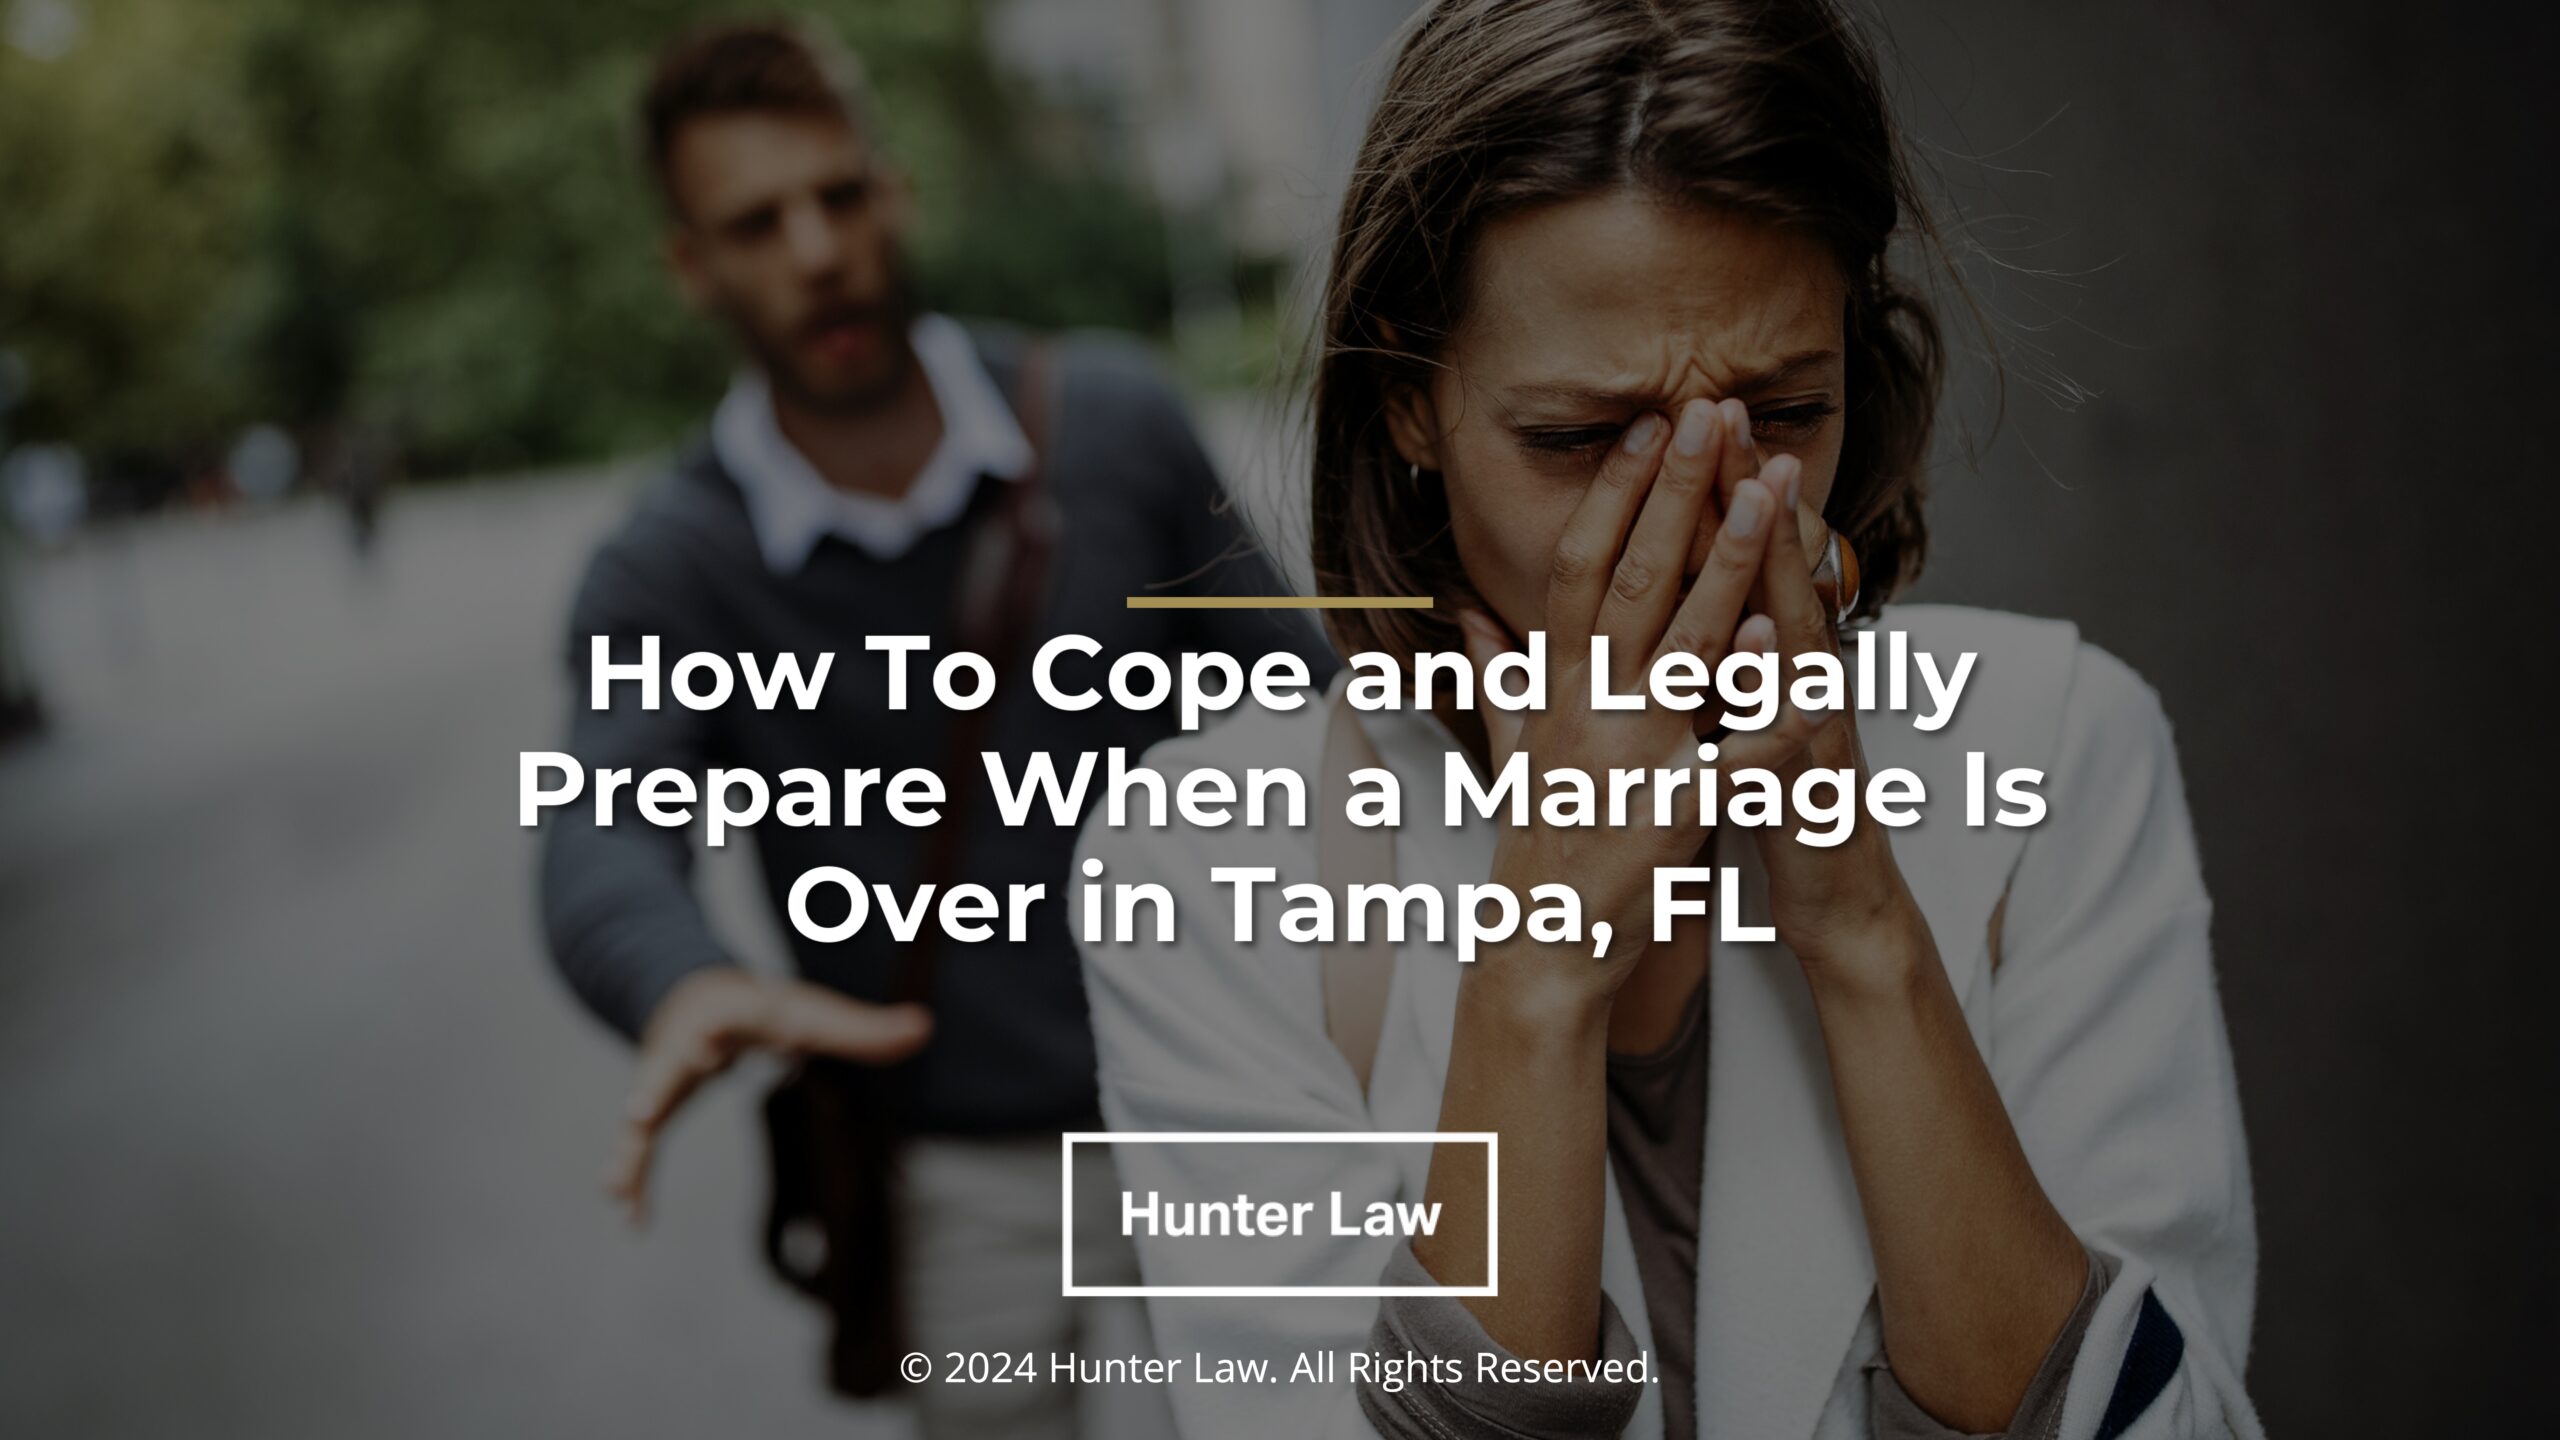 Featured: Couple breakup with woman crying- How to cope and legally prepare when a marriage is over